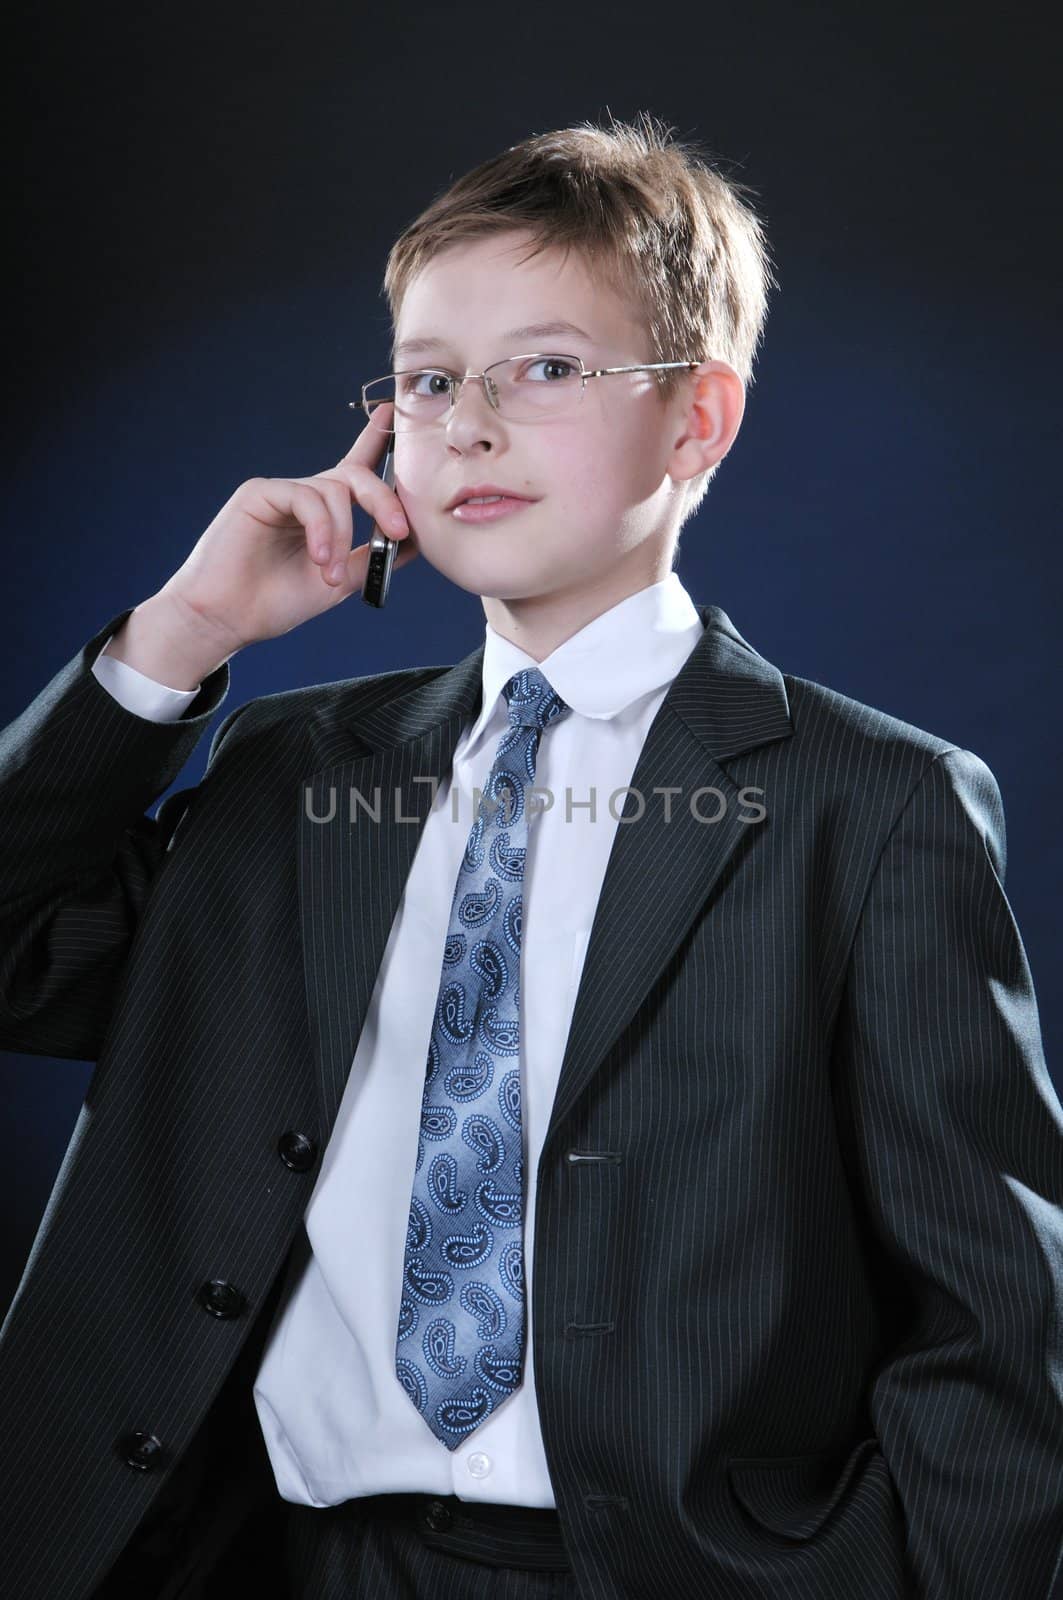 Boy in Suit on Cellphone by dyoma